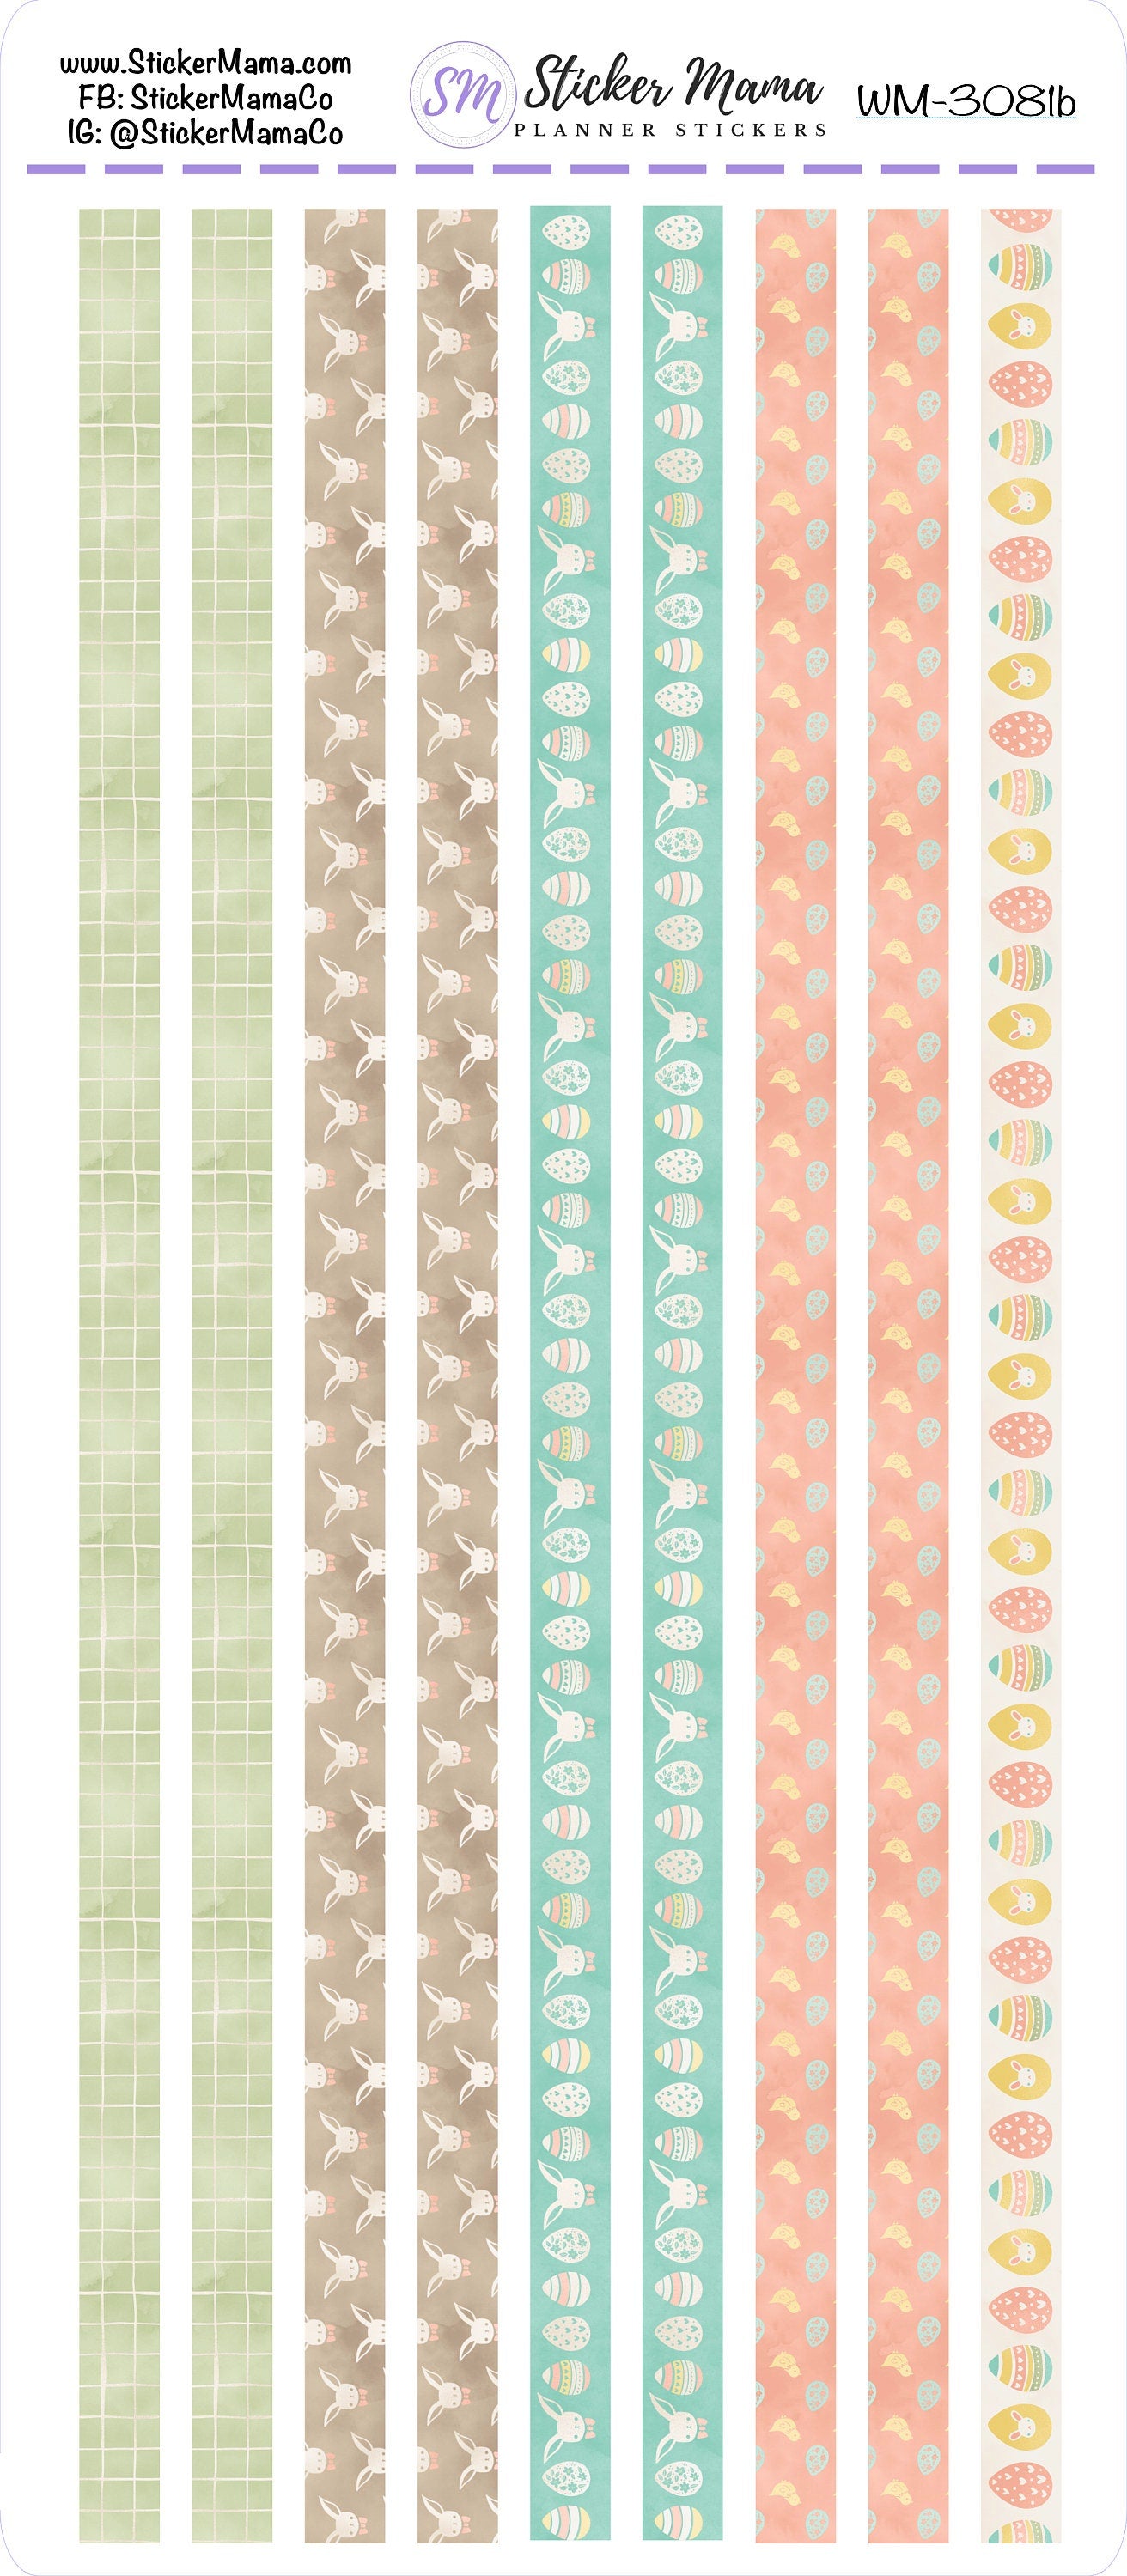 W-3081 - WASHI STICKERS - Easter Cheer - Planner Stickers - Washi for Planners